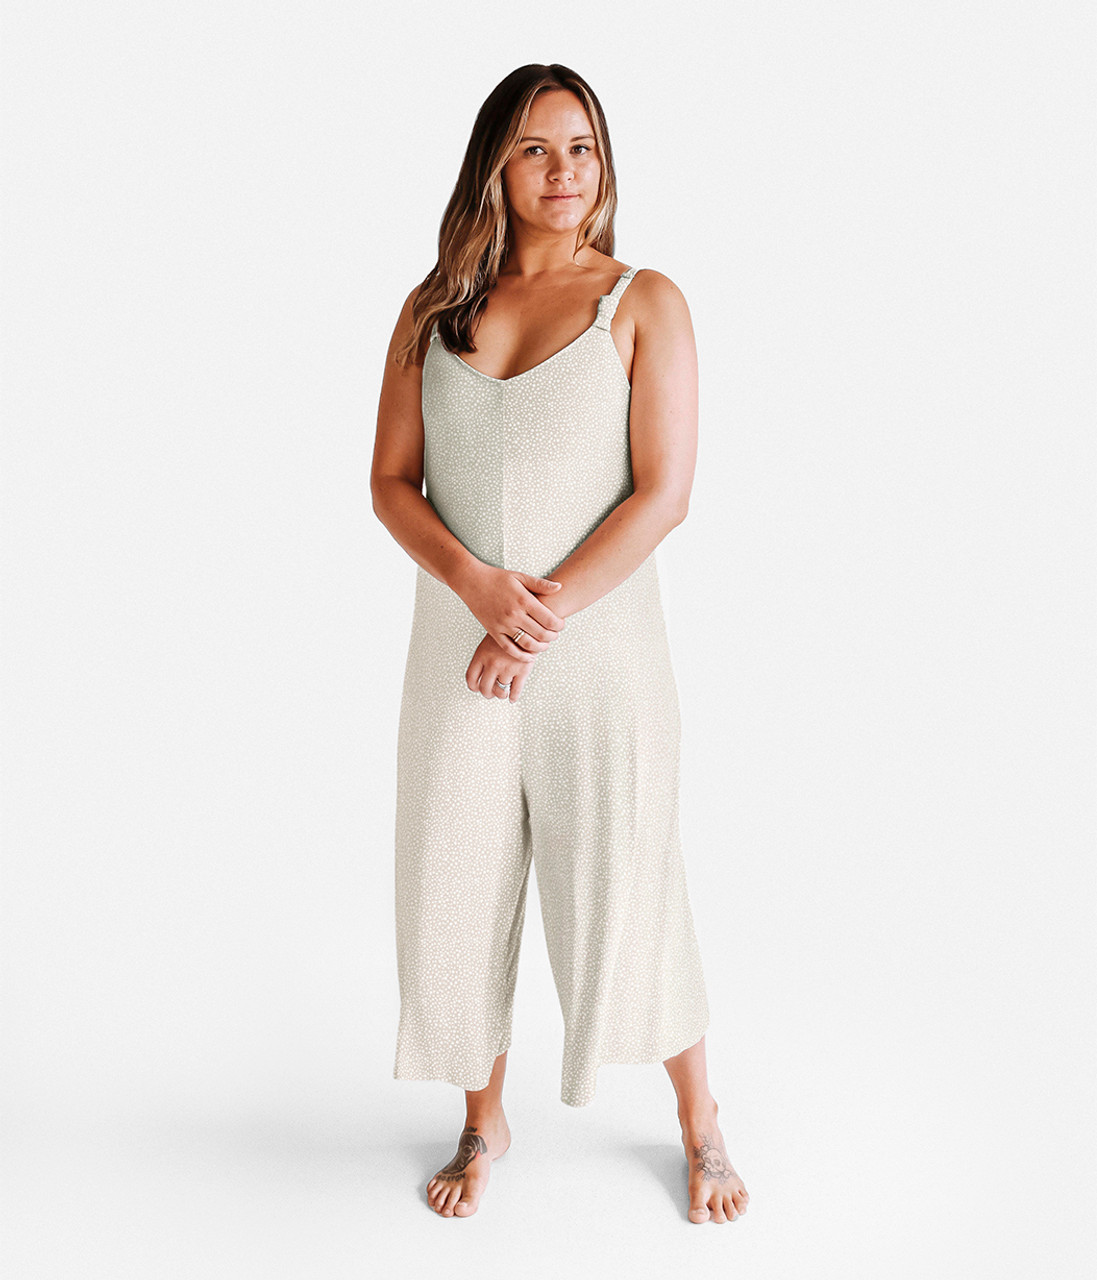 Pretty Little Thing Strappy Culotte Jumpsuit 6 (Sold Out!) | eBay